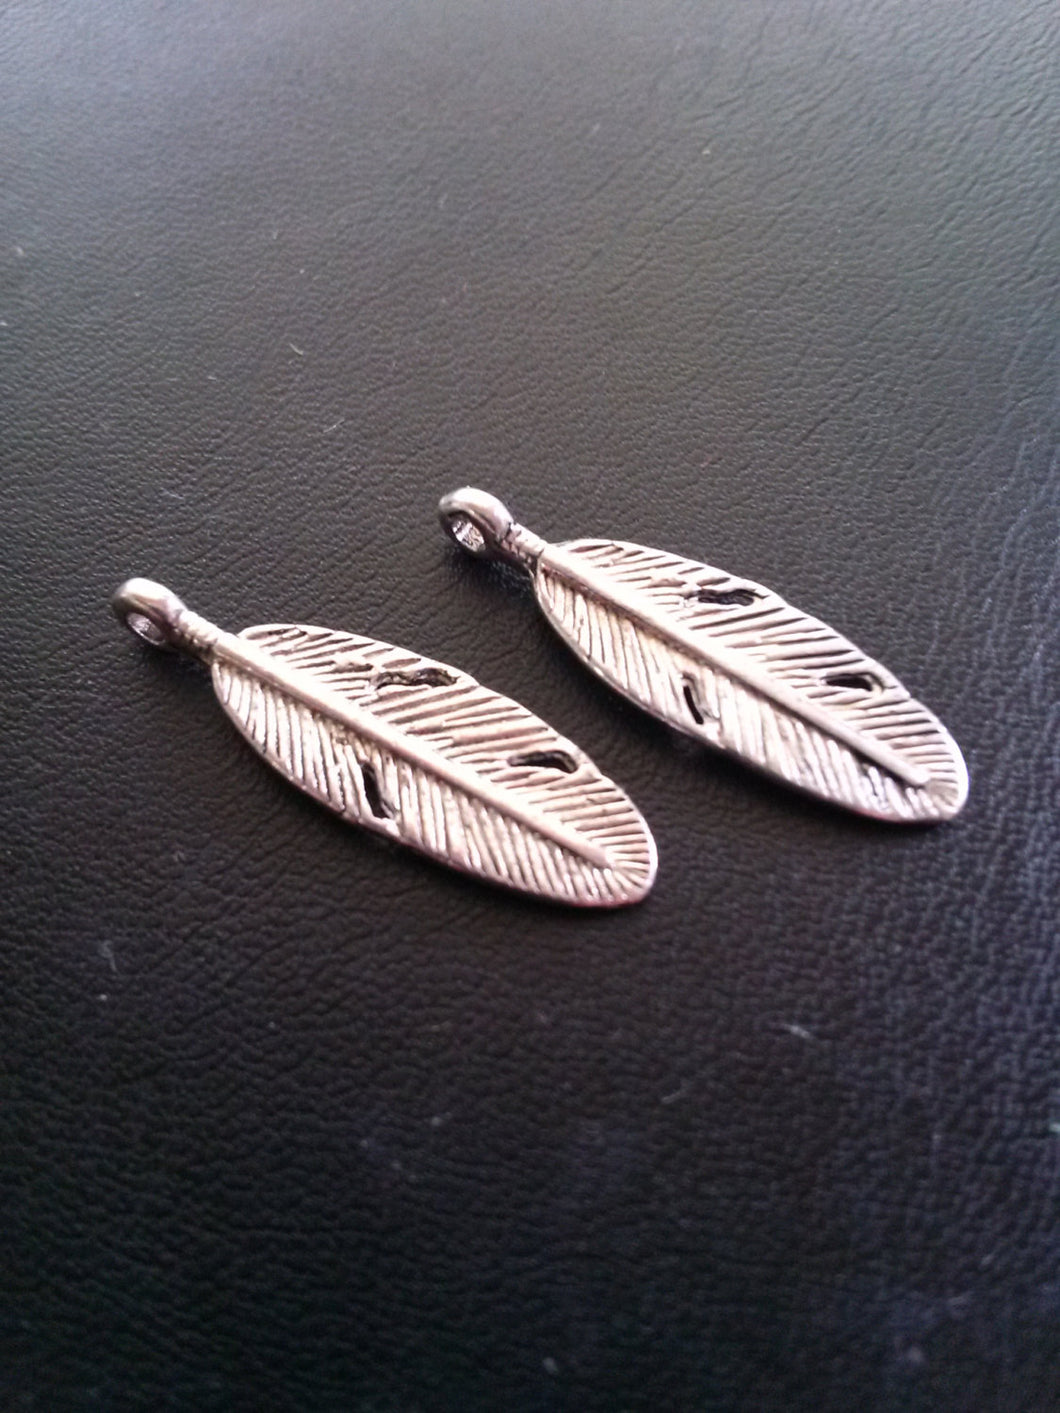 Feather Charms Feather Pendants Antiqued Silver Feather Charms Boho Charms Bohemian Charms Bulk Charms Wholesale Charms 50 pieces 30mm